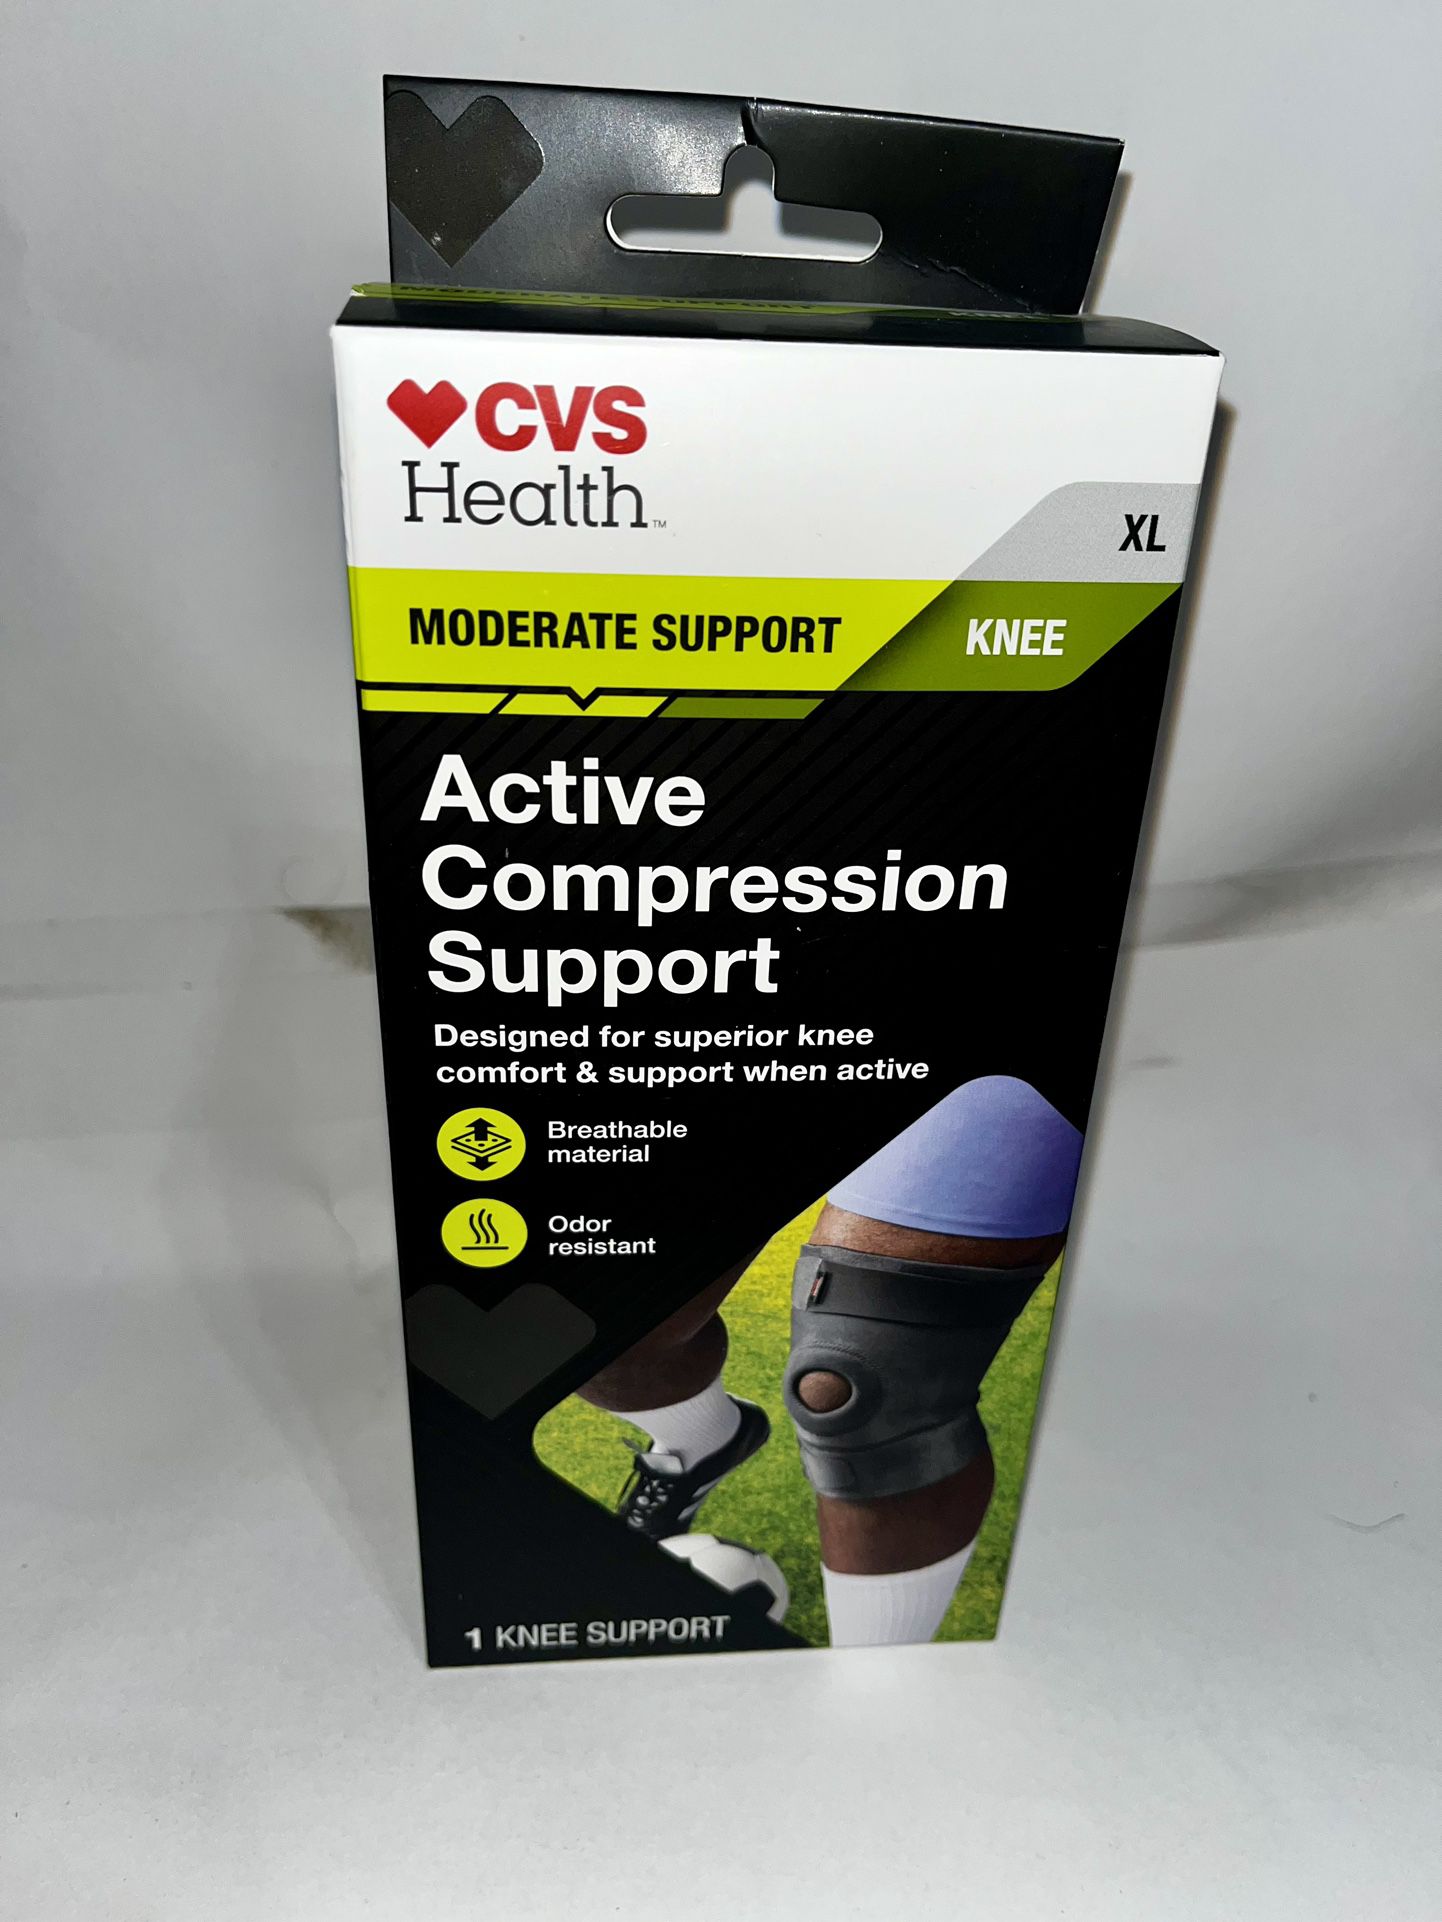 CVS Health Knee Active Compression Support Moderate Support XL Size